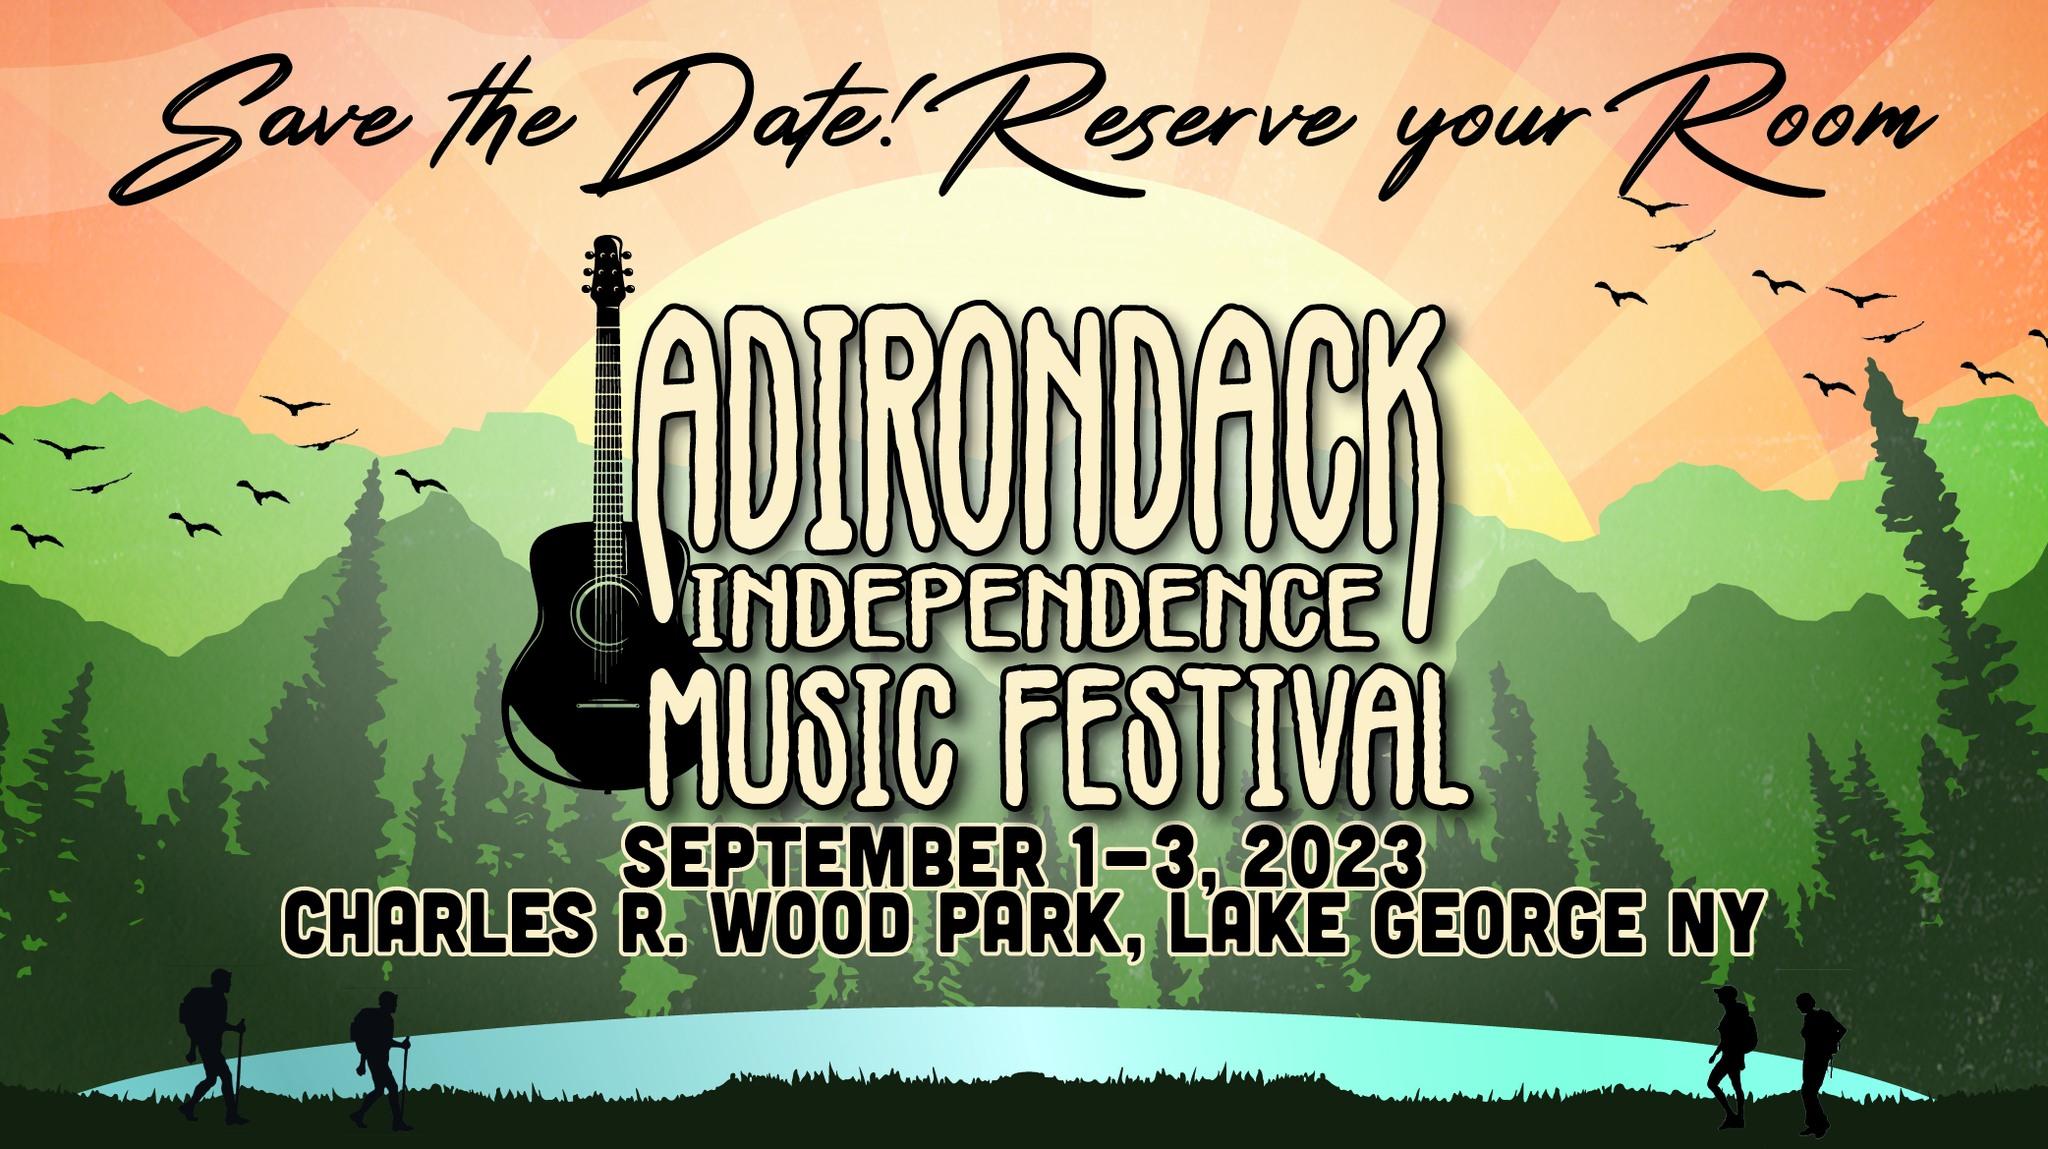 Adirondack Independence Music Festival Festival Lineup, Dates and